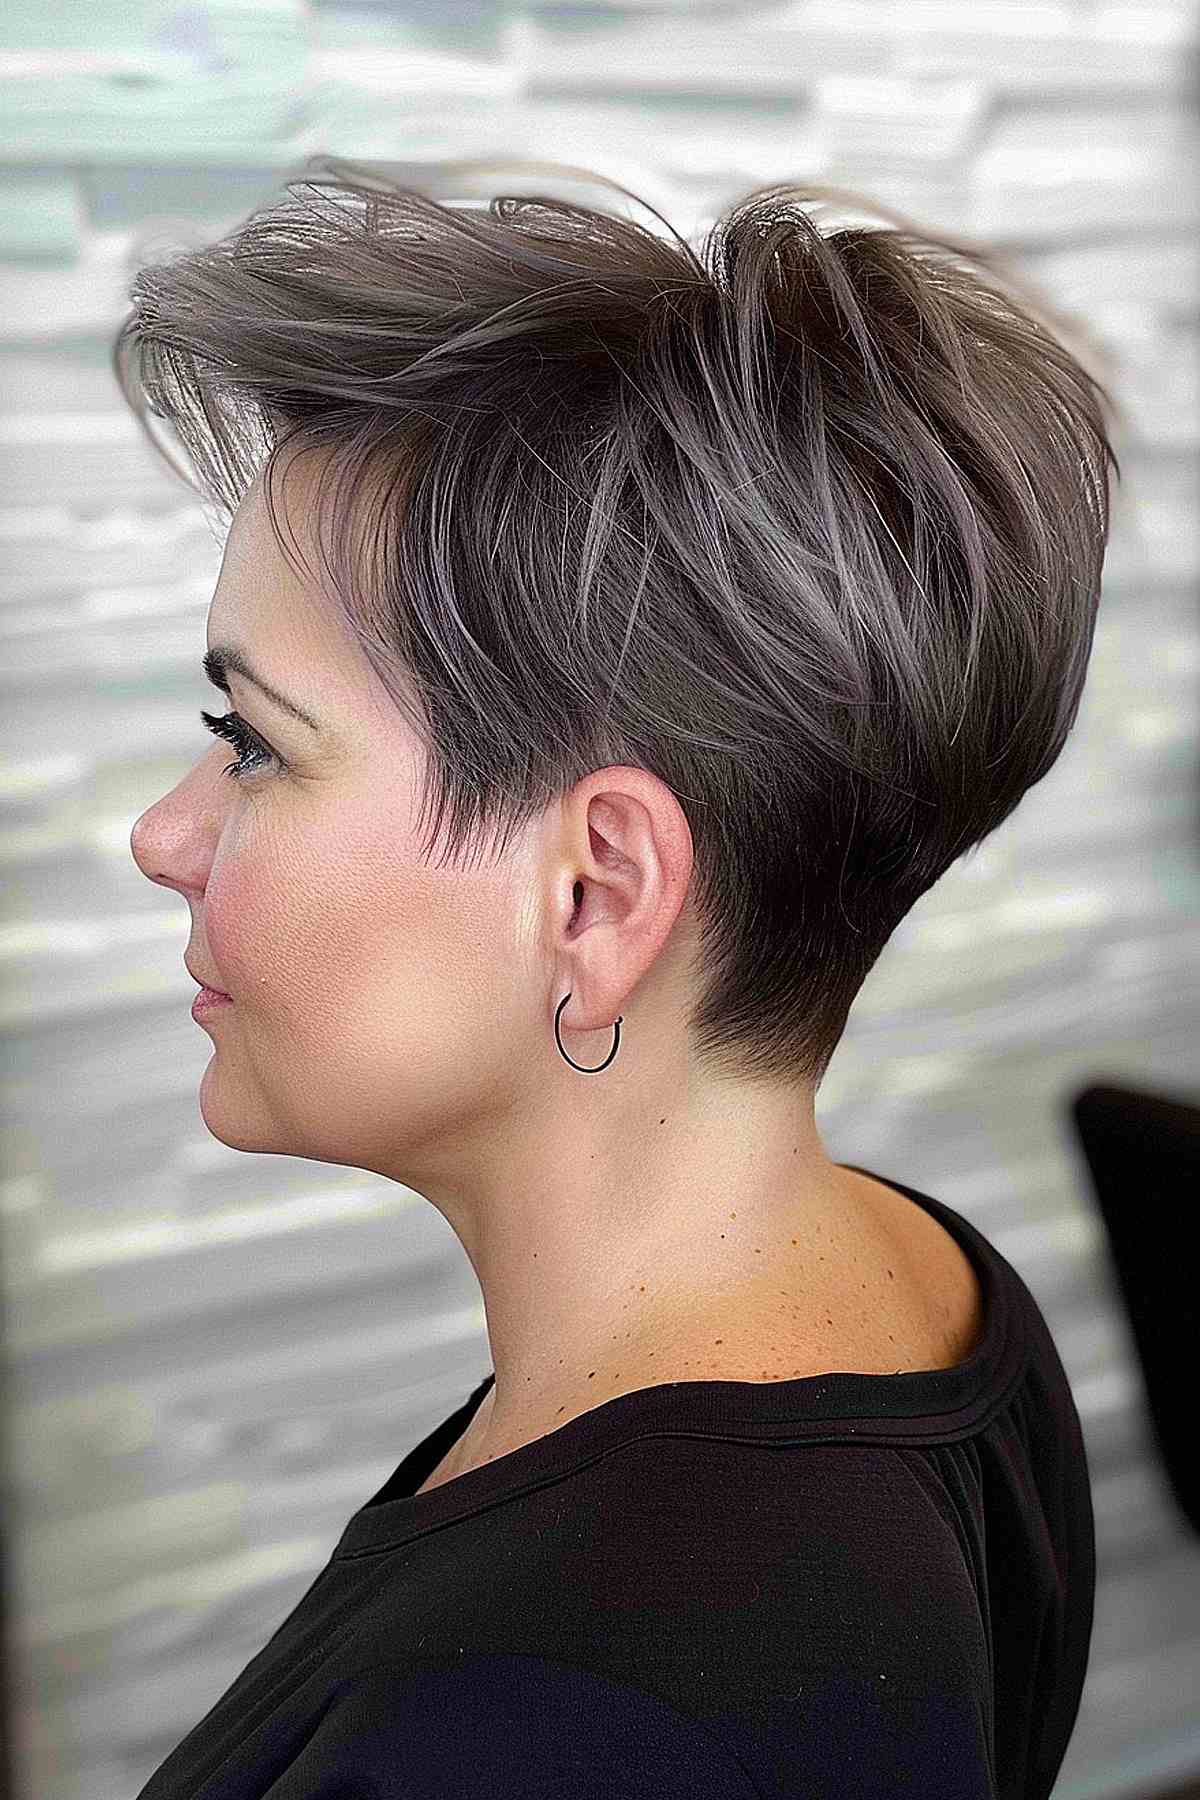 Tapered pixie hairstyle with feathery and piece-y look for fine hair